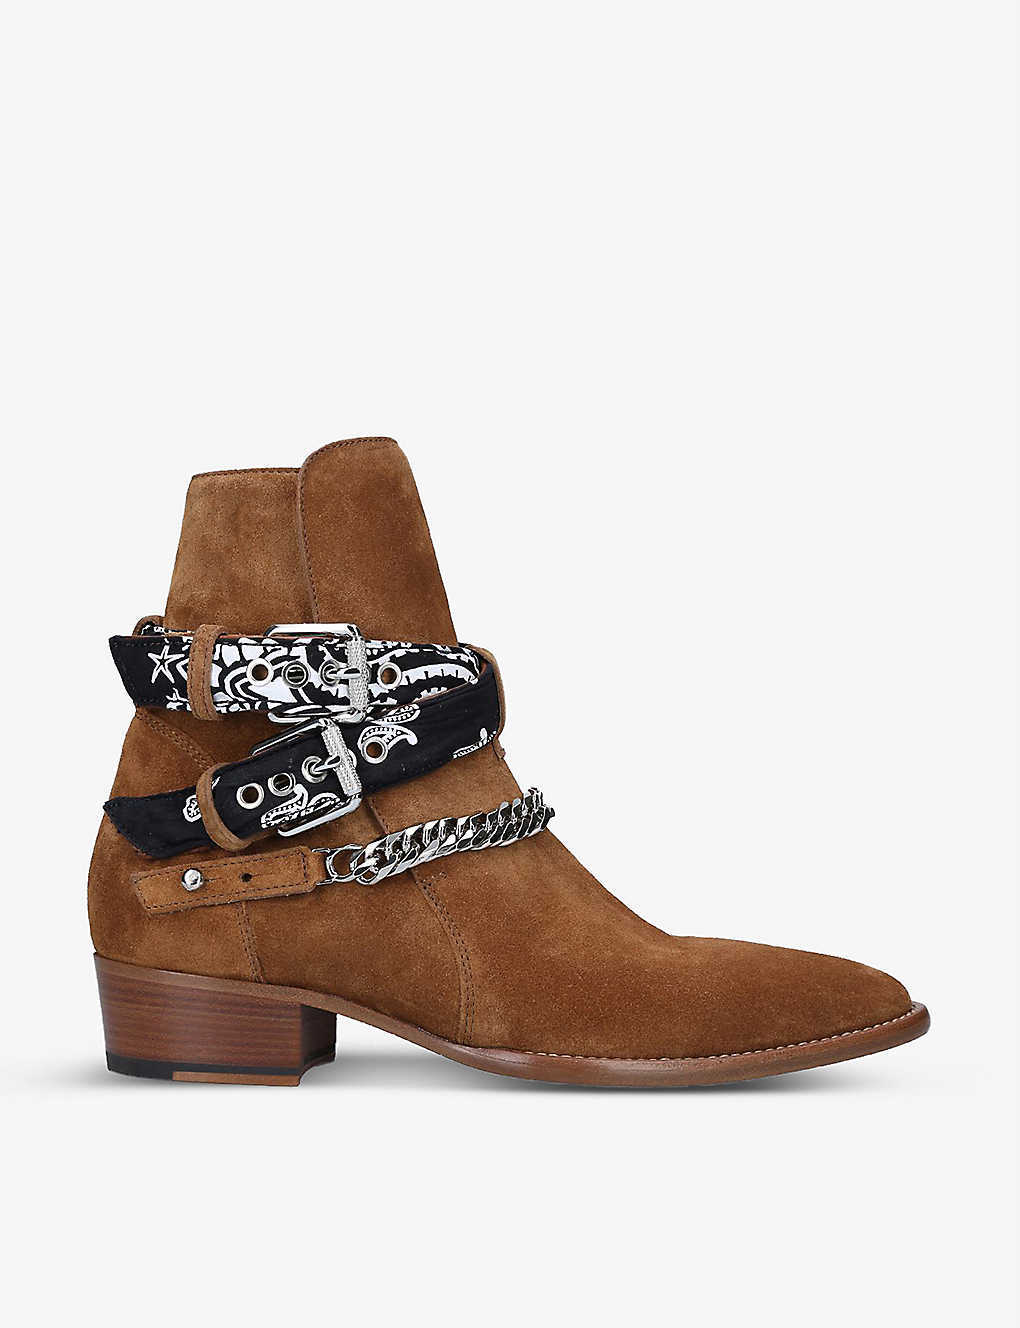 Shop Amiri Men's Taupe Bandana Buckled Suede Boots